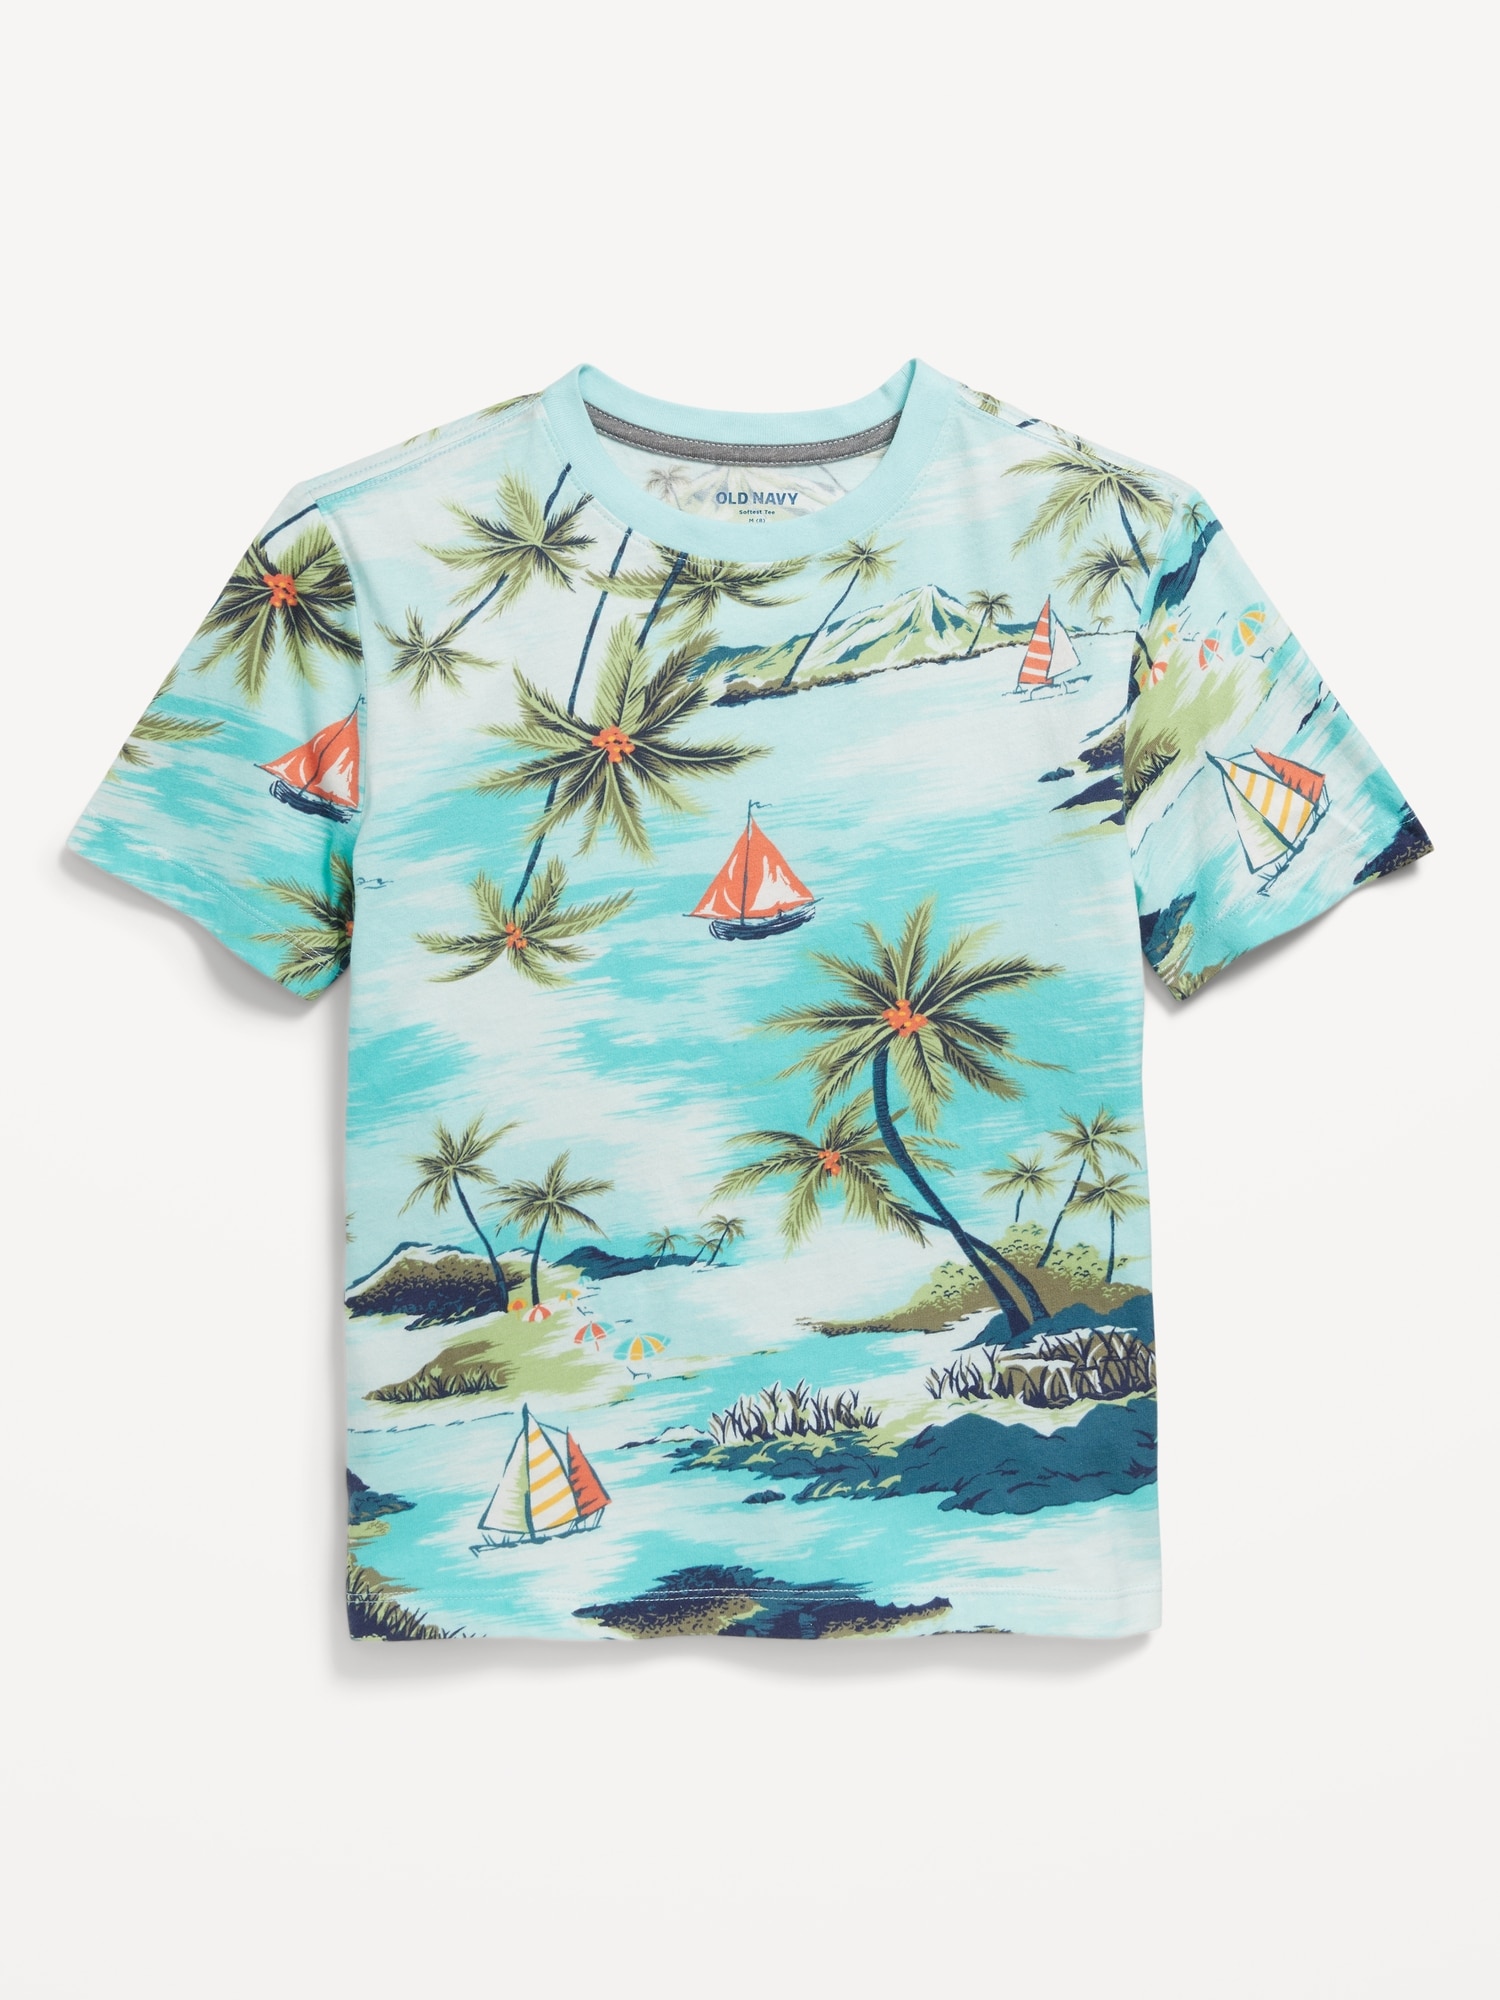 Softest Crew-Neck T-Shirt for Boys | Old Navy